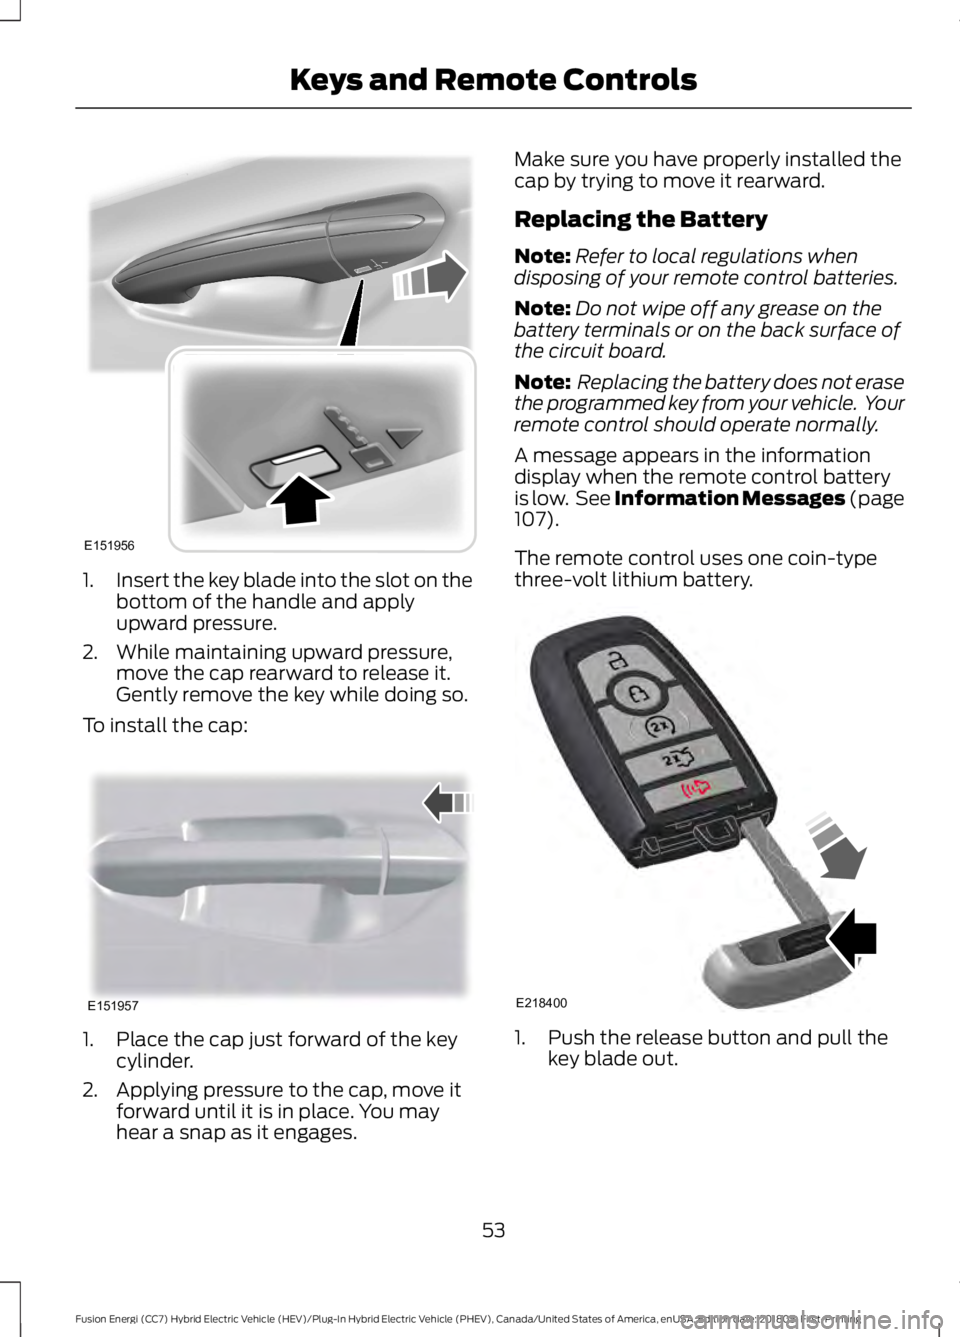 FORD FUSION ENERGI 2019  Owners Manual 1.
Insert the key blade into the slot on the
bottom of the handle and apply
upward pressure.
2. While maintaining upward pressure, move the cap rearward to release it.
Gently remove the key while doin